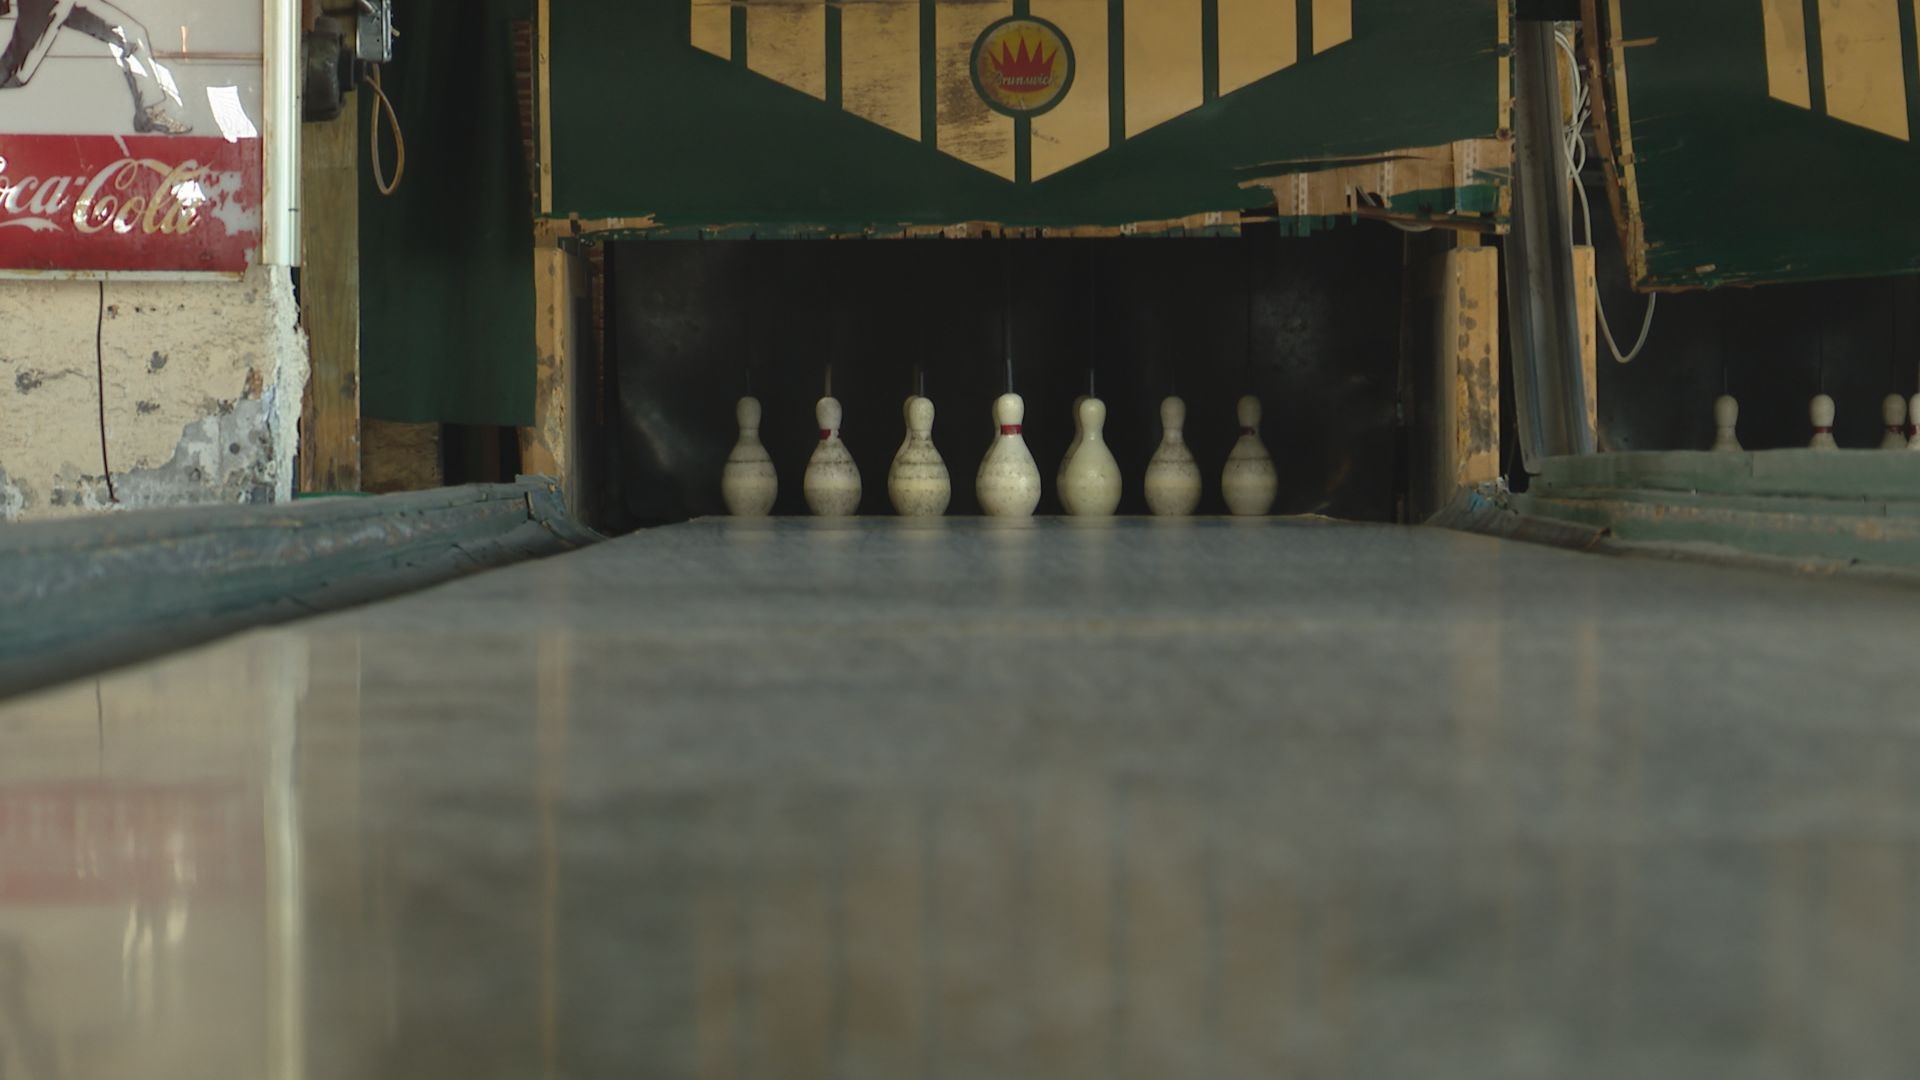 Action Duckpin Bowl gives visitors a chance to play in an atmosphere that's frozen in time.